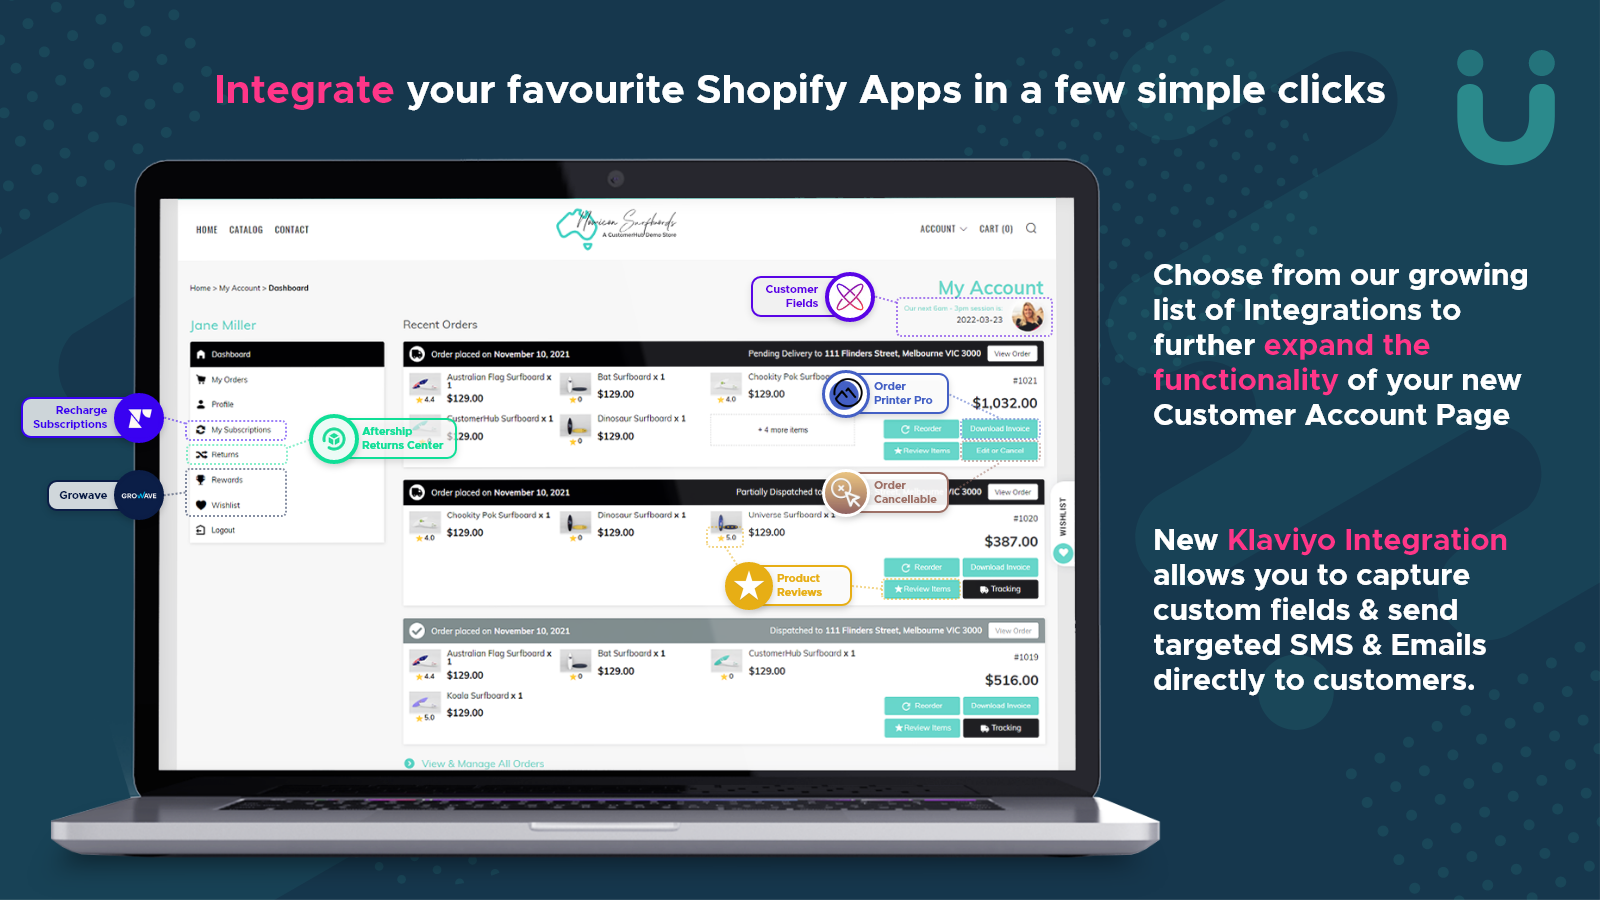 Integrate your favourite Shopify Apps - now with Klaviyo!